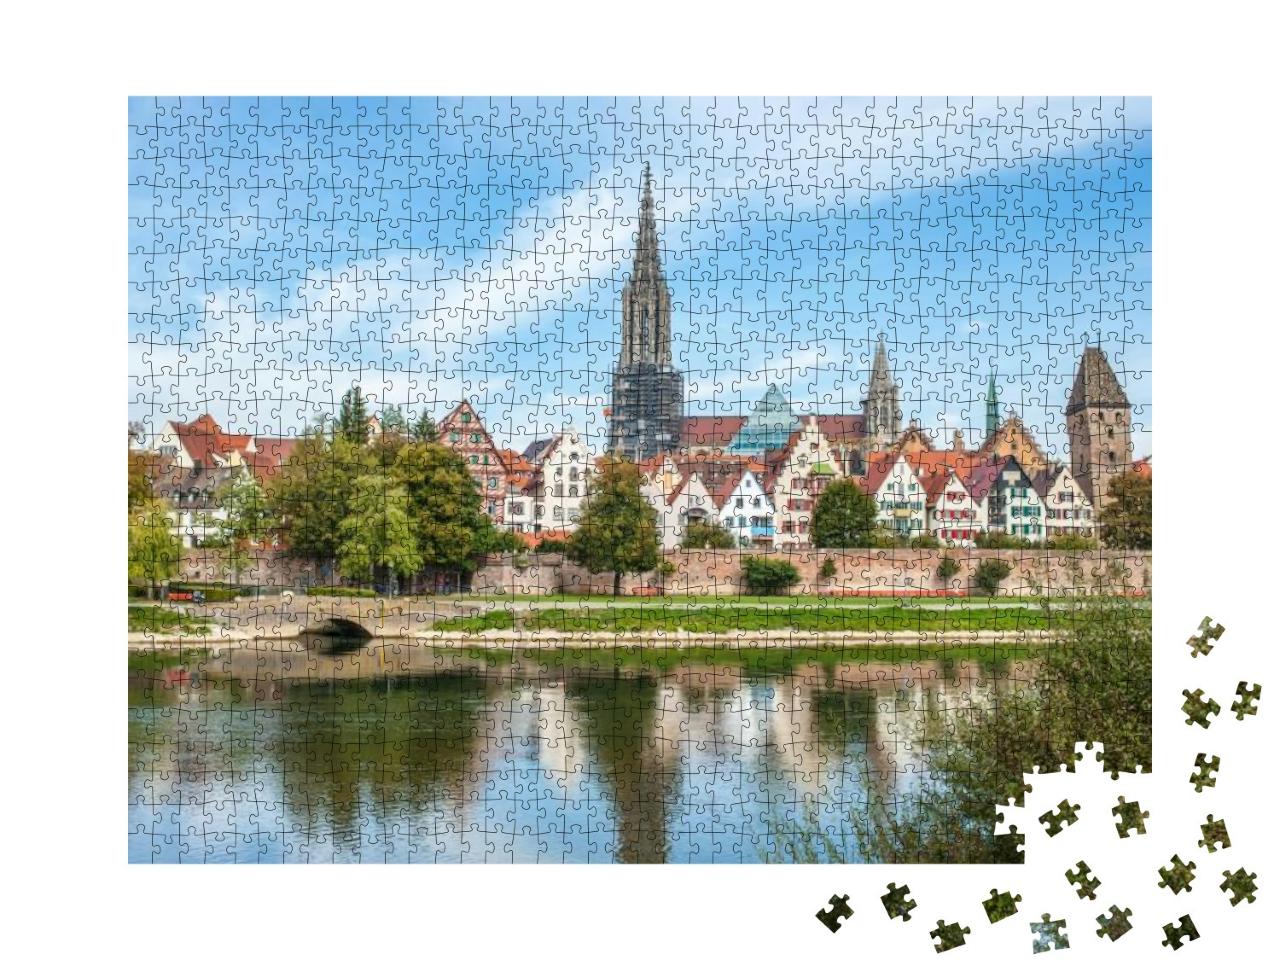 Panorama View of Ulm City Center, Germany... Jigsaw Puzzle with 1000 pieces